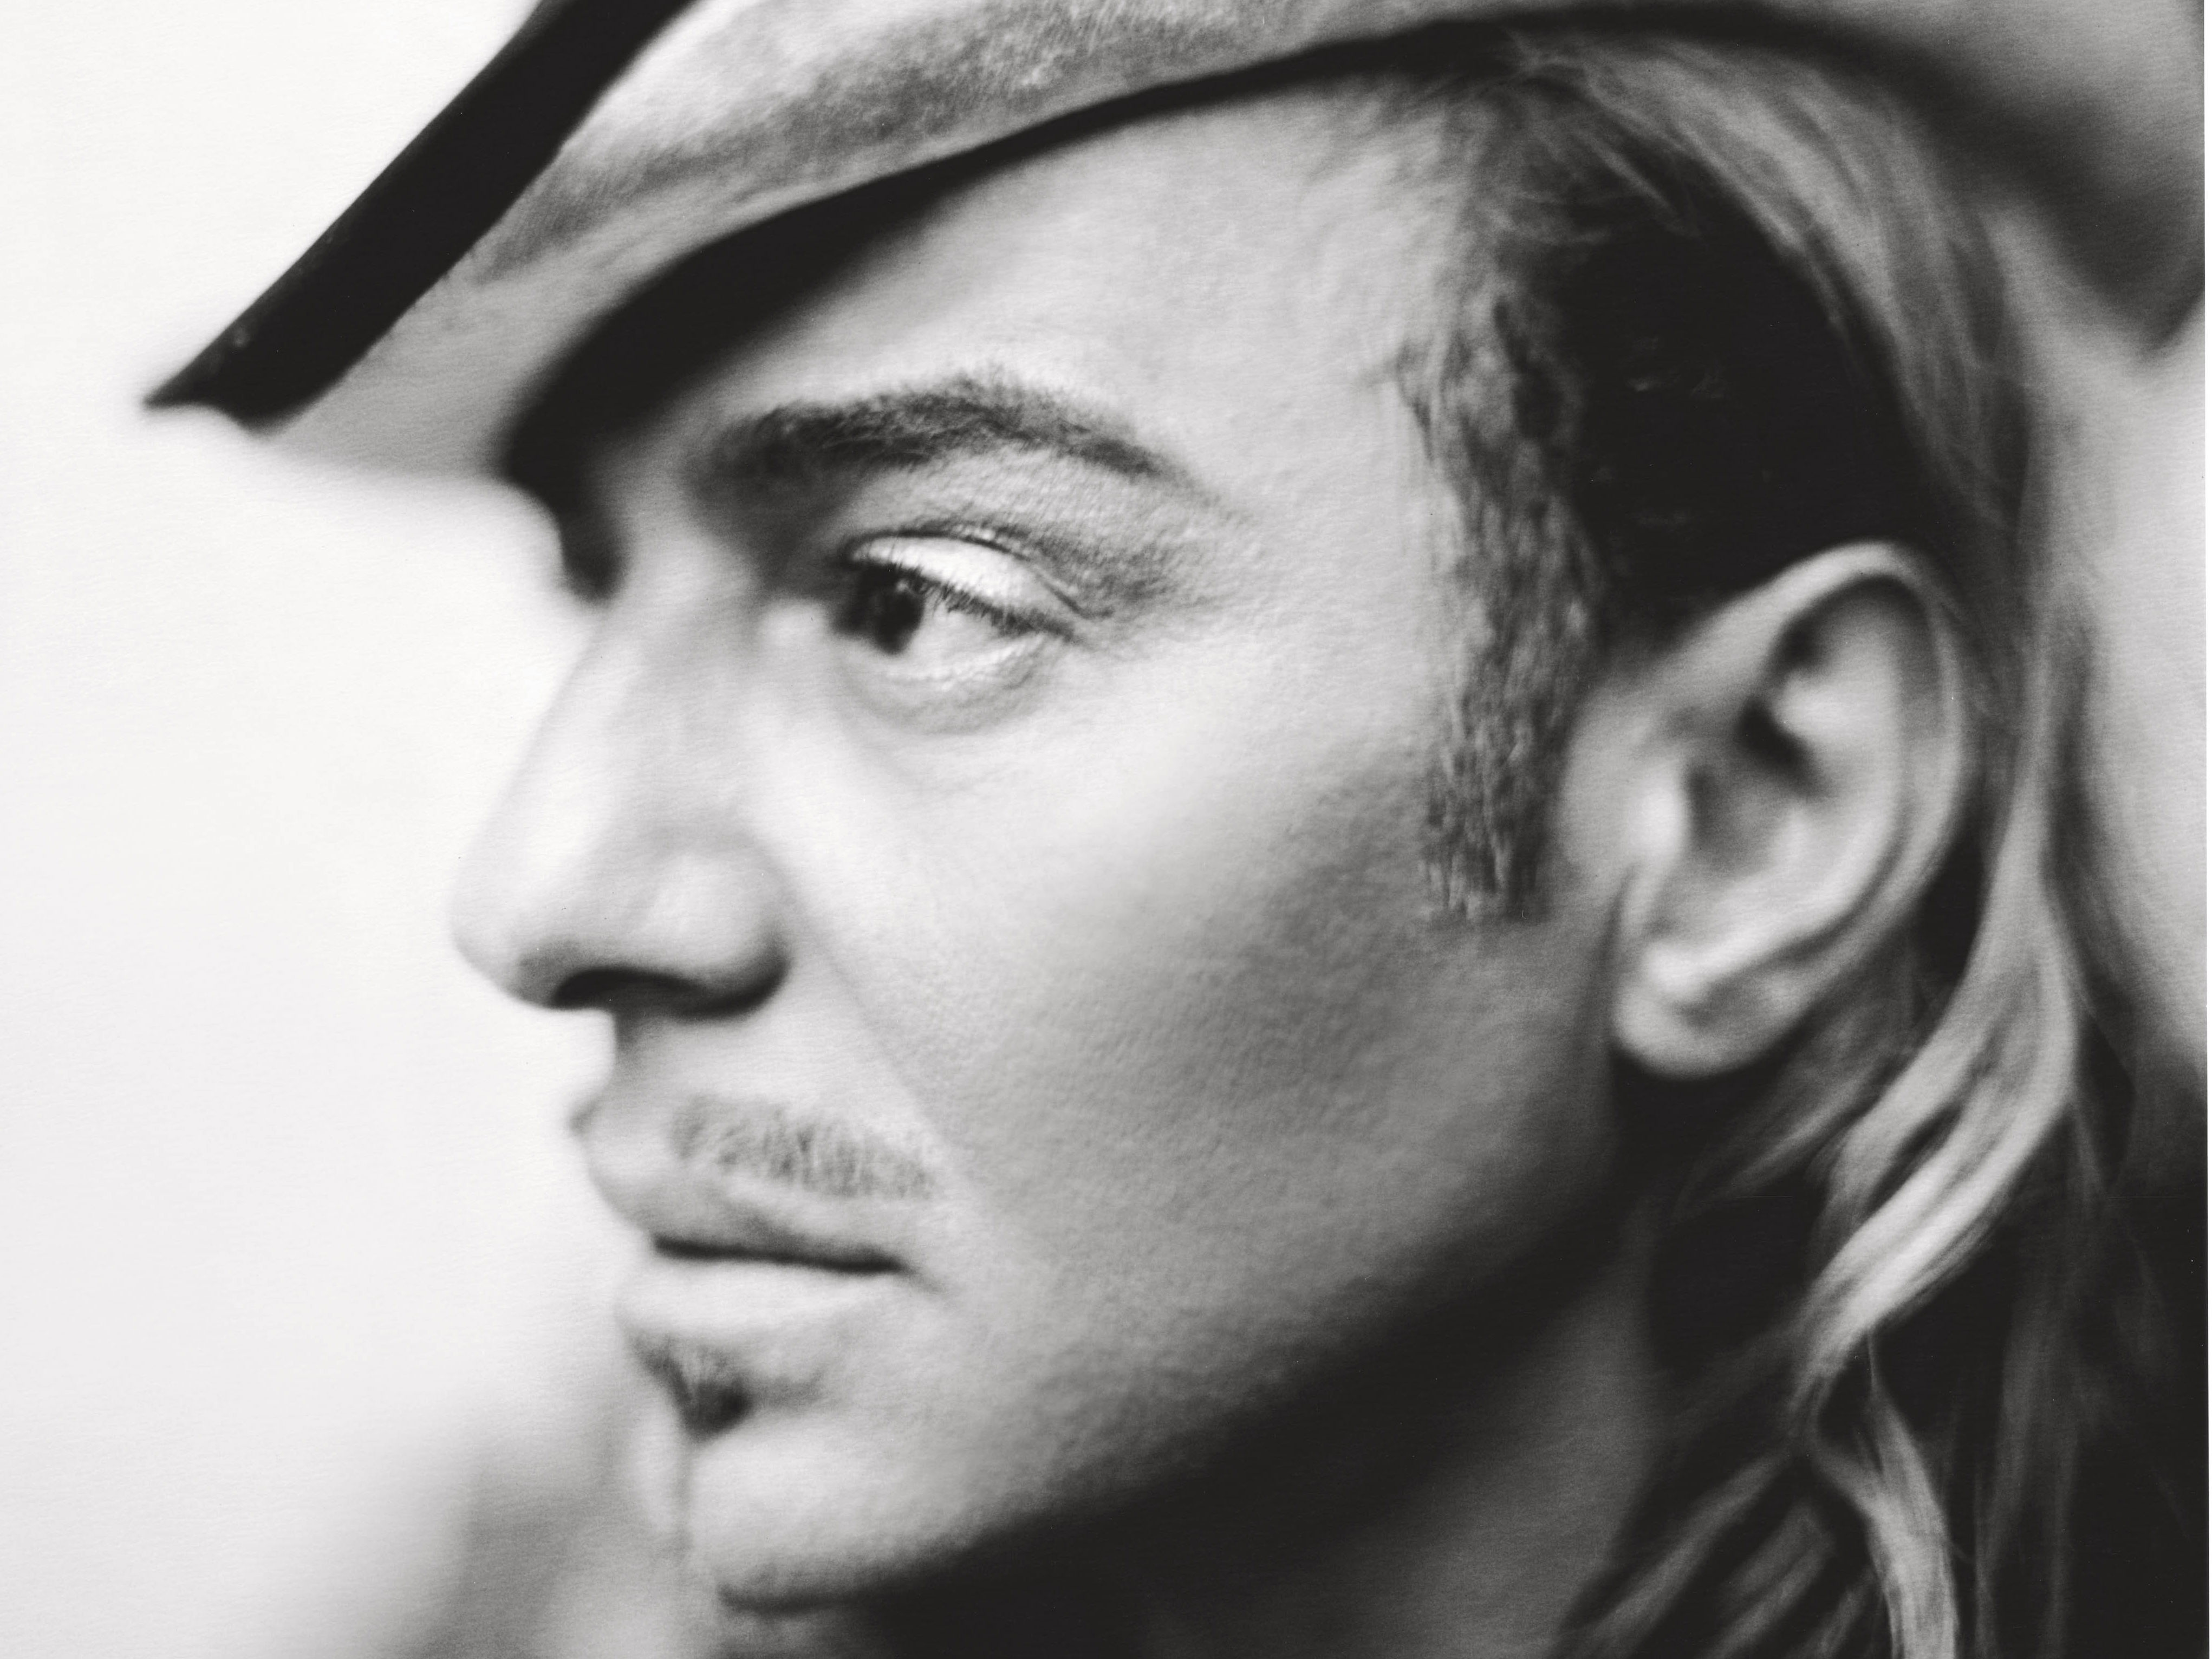 Will the John Galliano Repackaging Work? - The New York Times